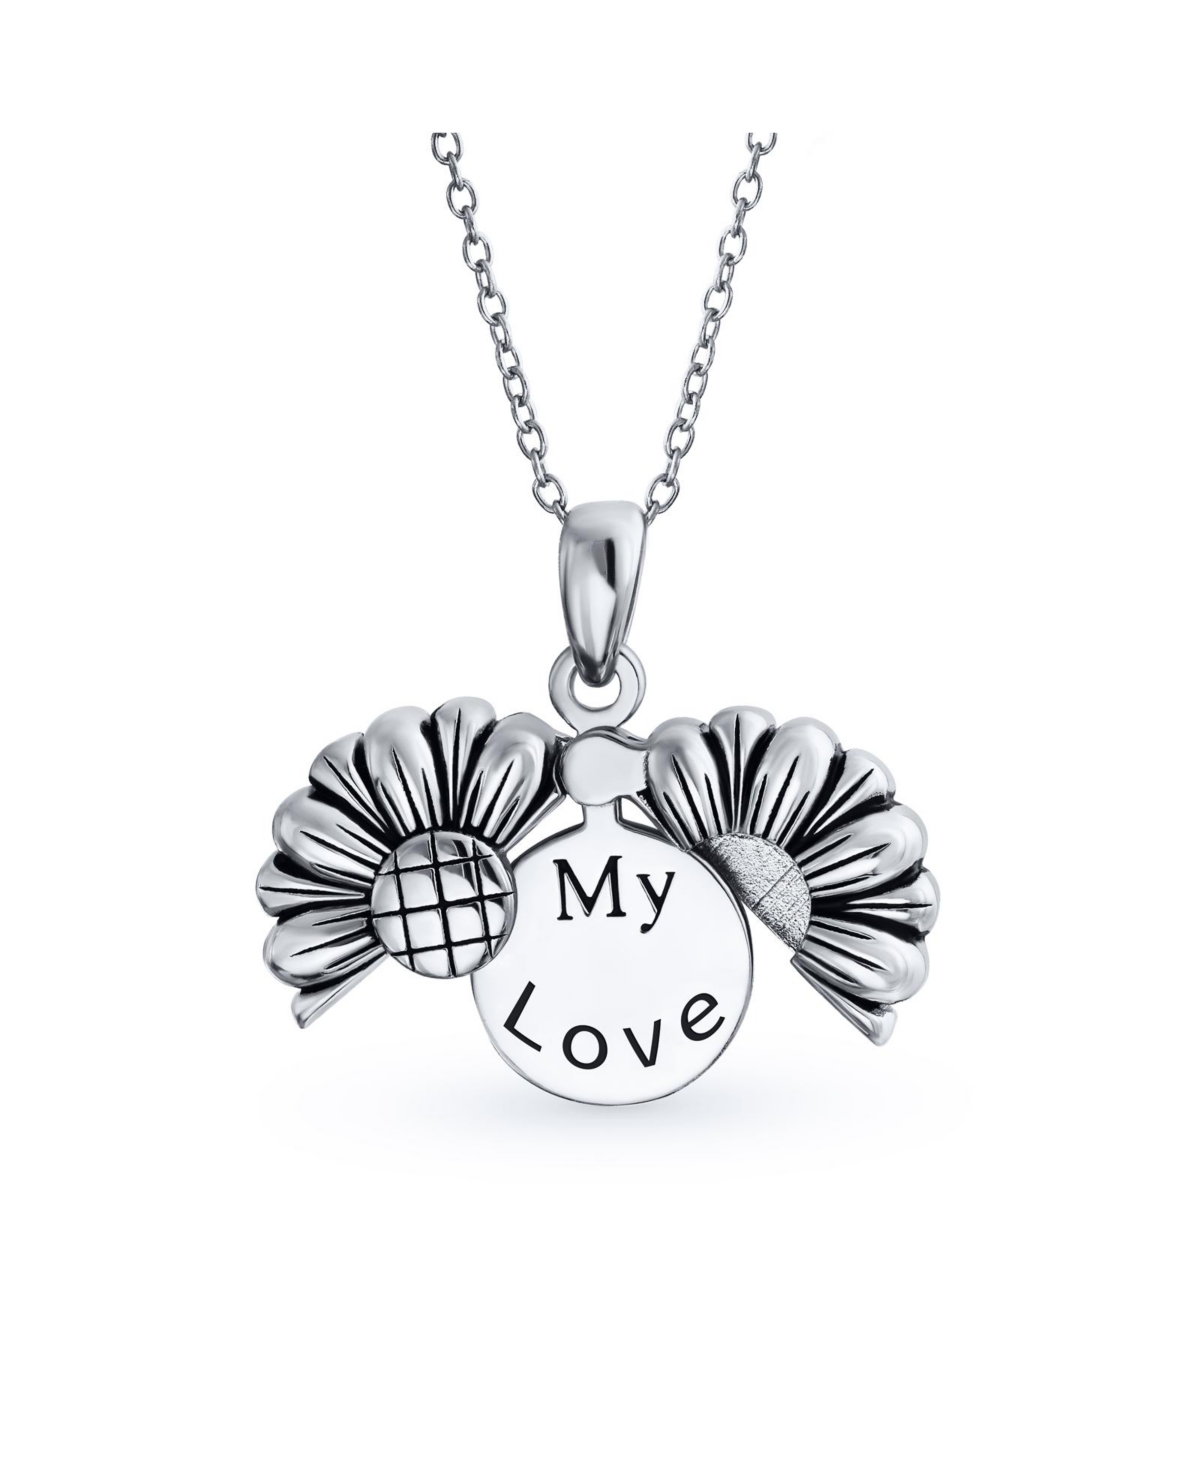 Floral Flower Inspirational Saying My Love Words Sunflower Open Locket Pendant Necklace For Women Teen Girlfriend Rhodium Plated .925 St